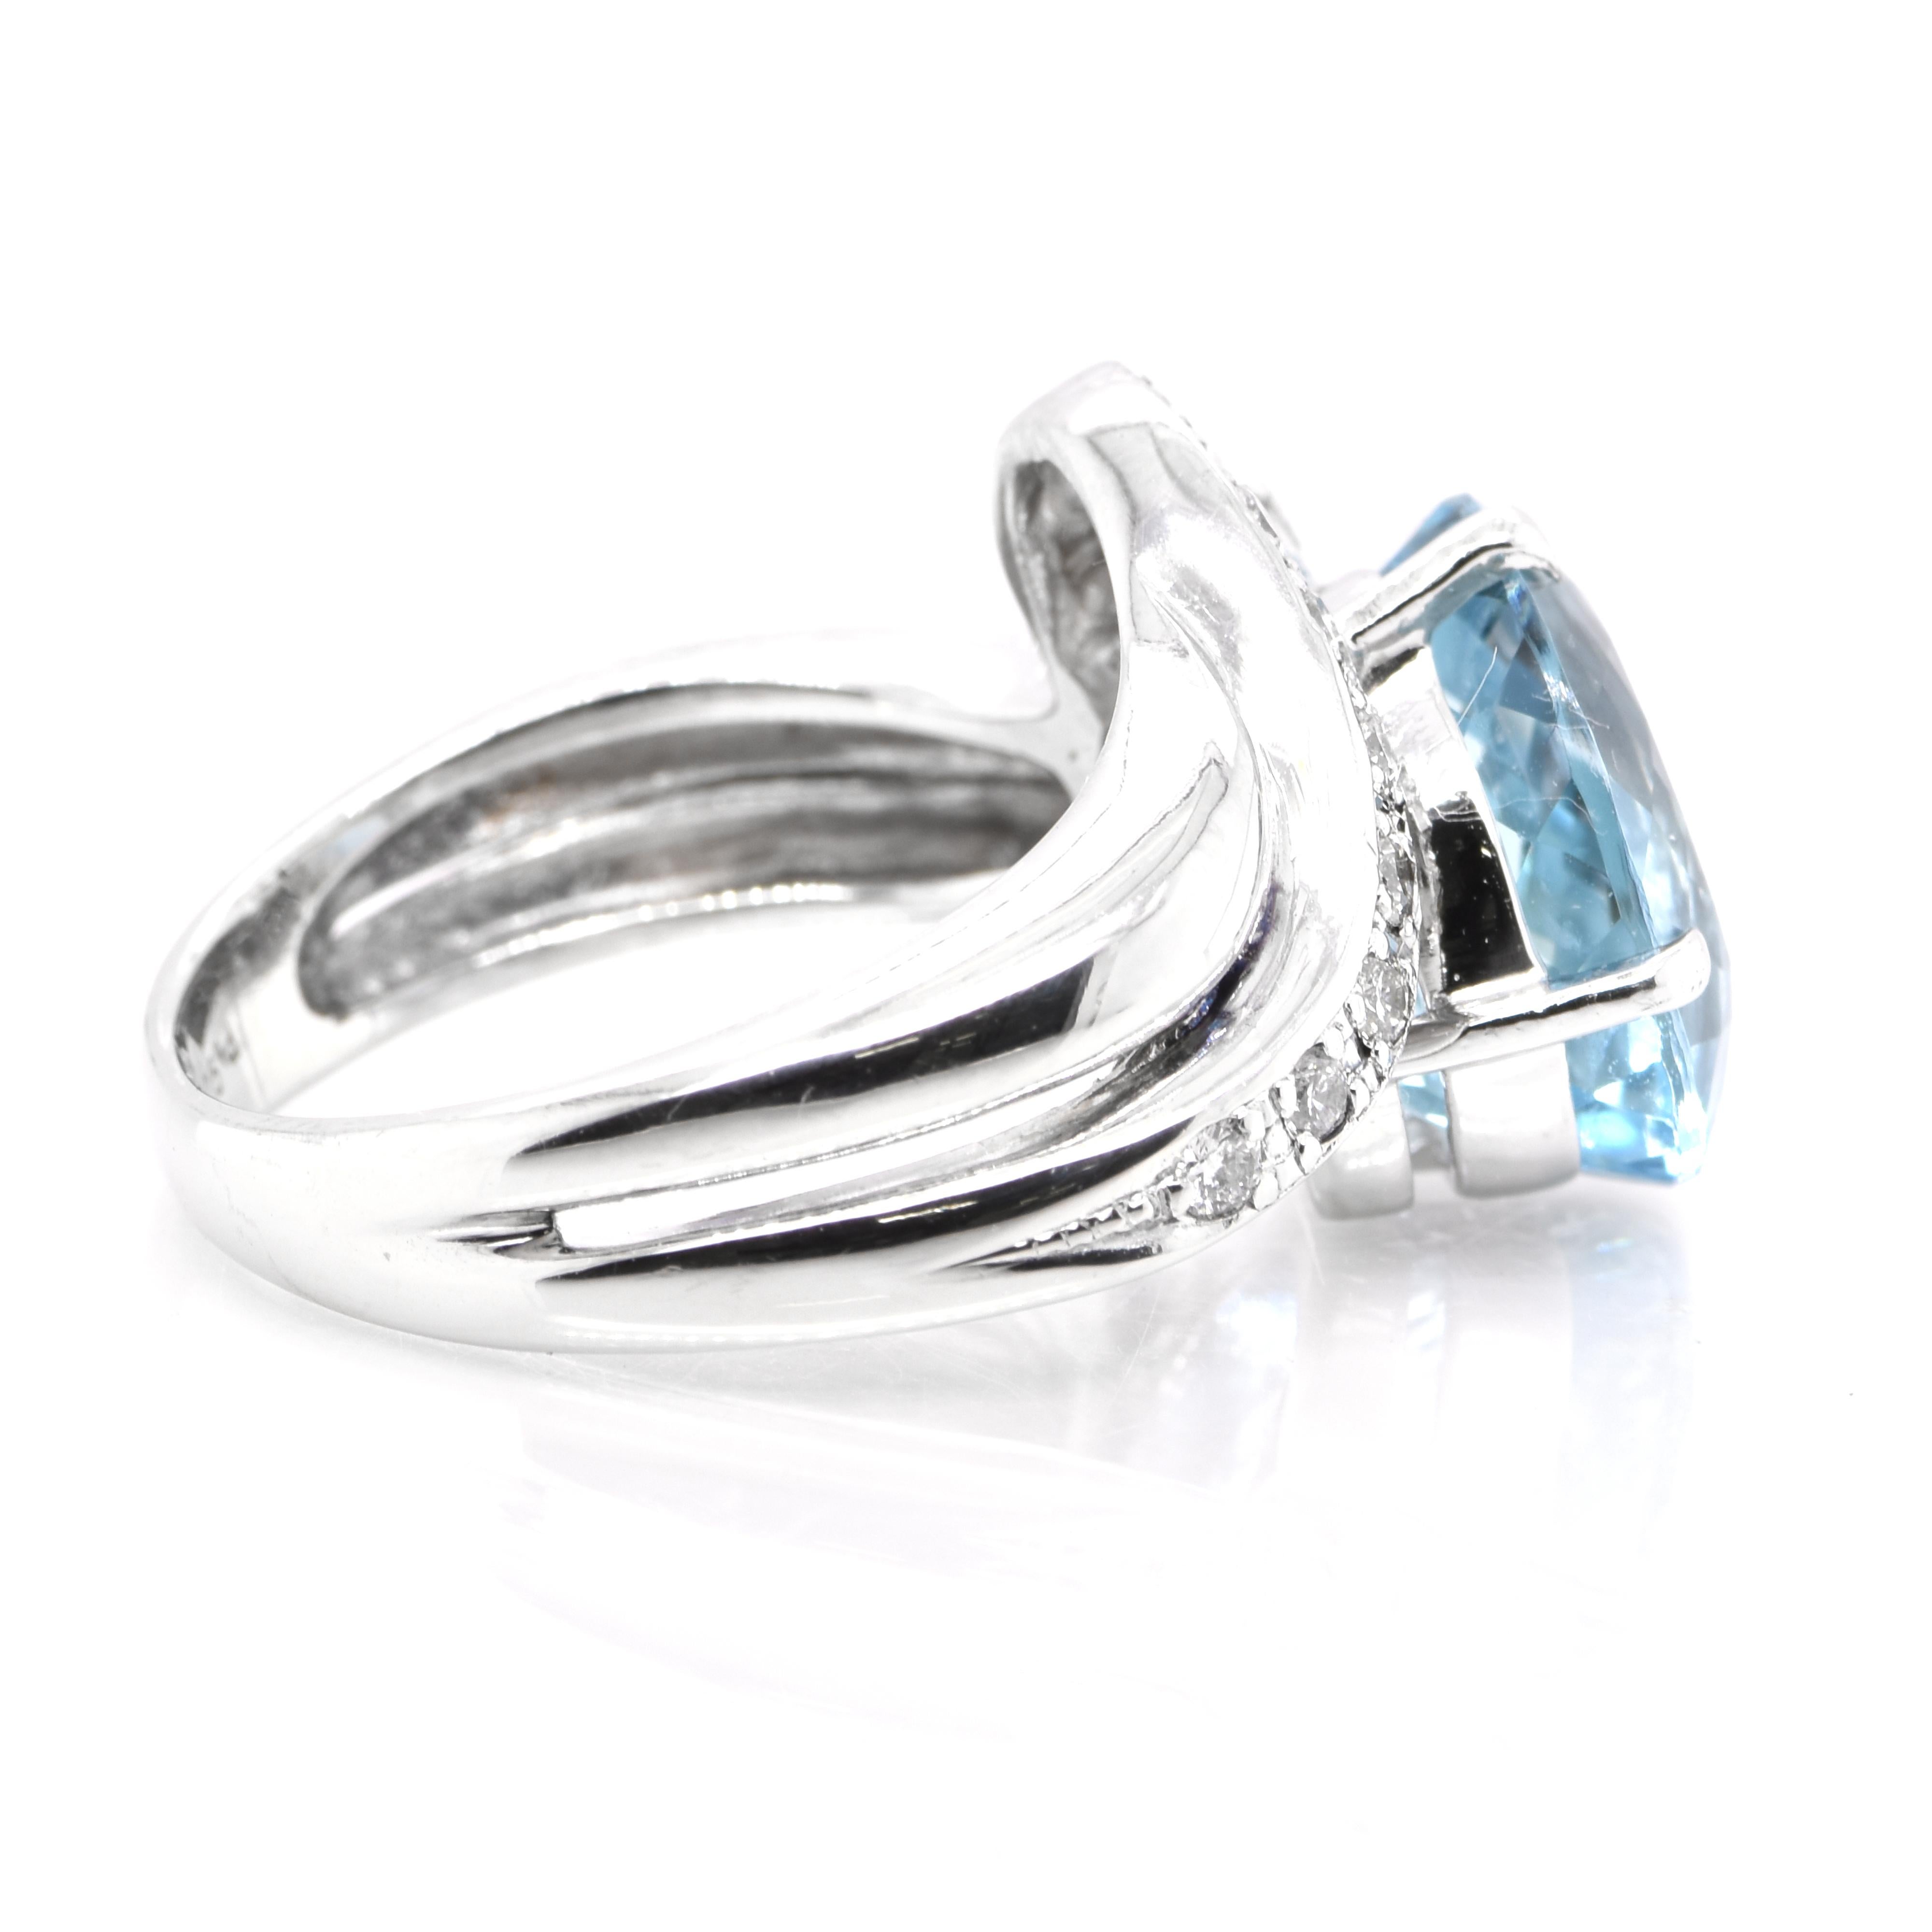 5.03 Carat Natural Aquamarine and Diamond Cocktail Ring Set in Platinum In Excellent Condition For Sale In Tokyo, JP